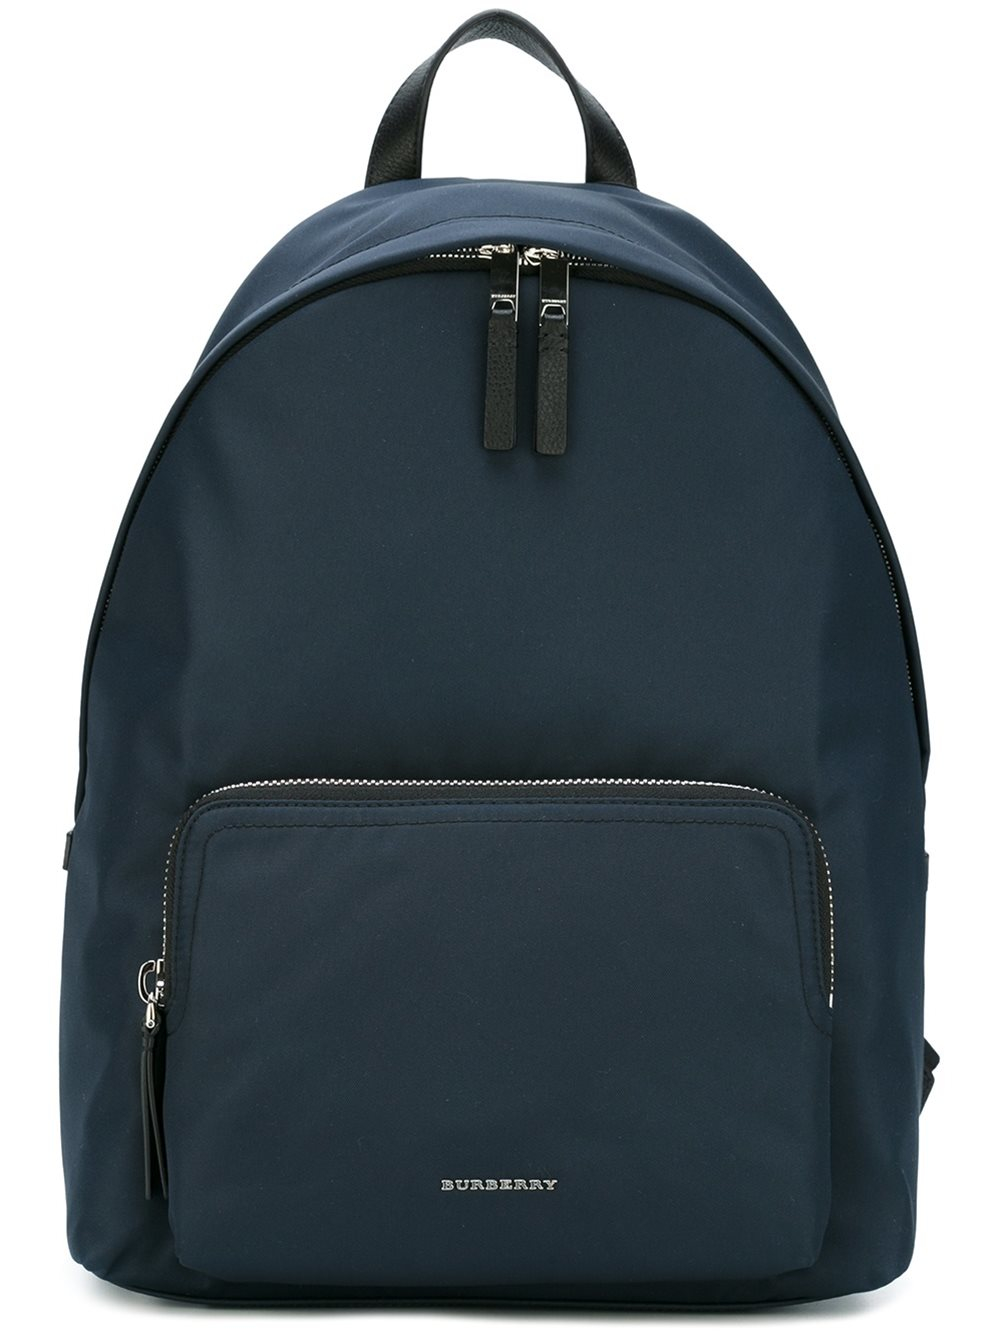 Burberry Leather Padded Medium Backpack in Blue for Men - Lyst